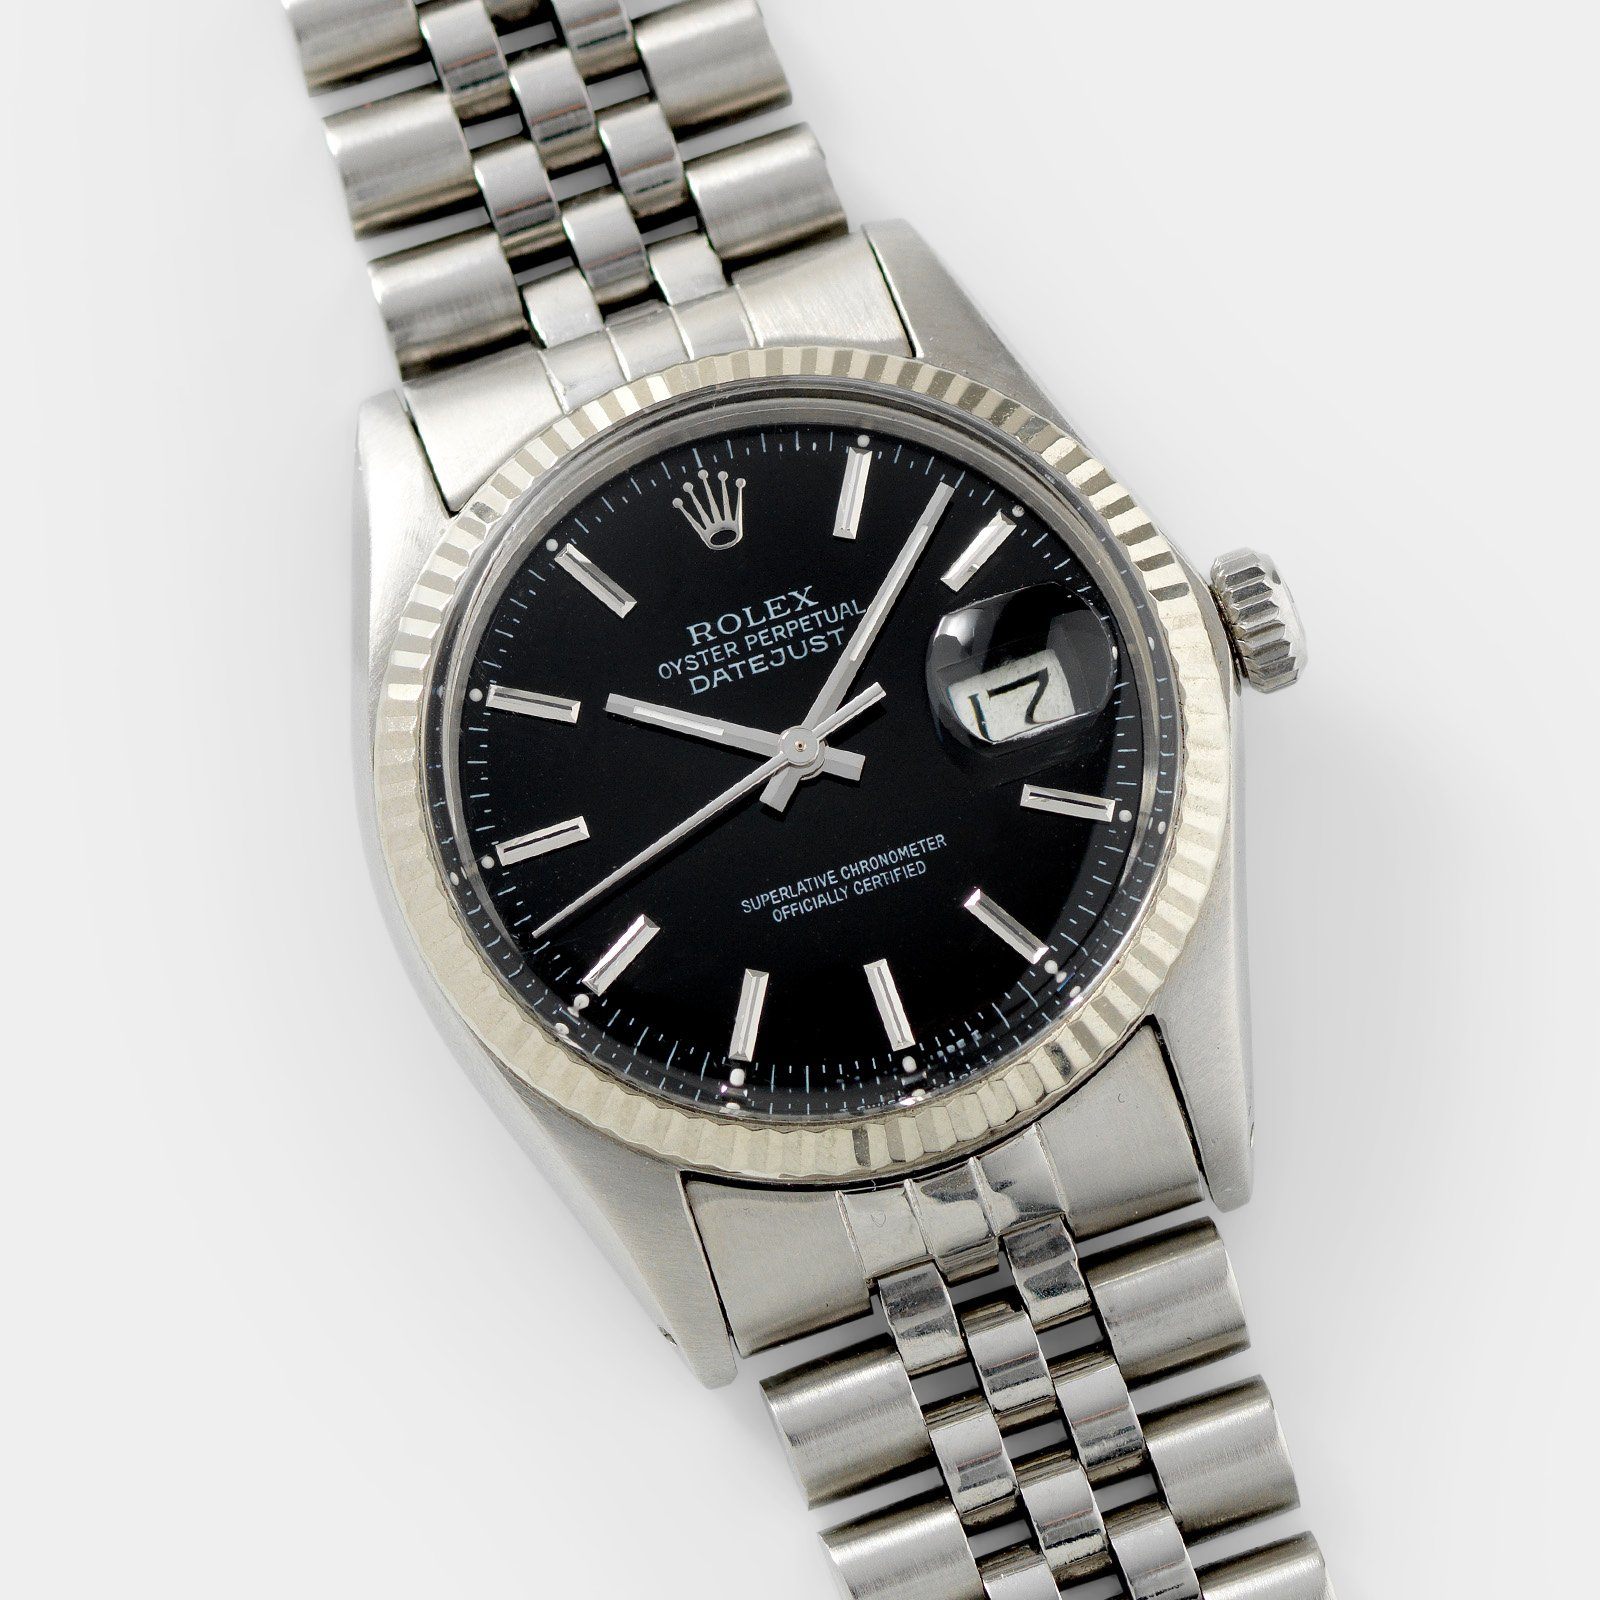 Rolex Datejust Black Dial Reference 16014